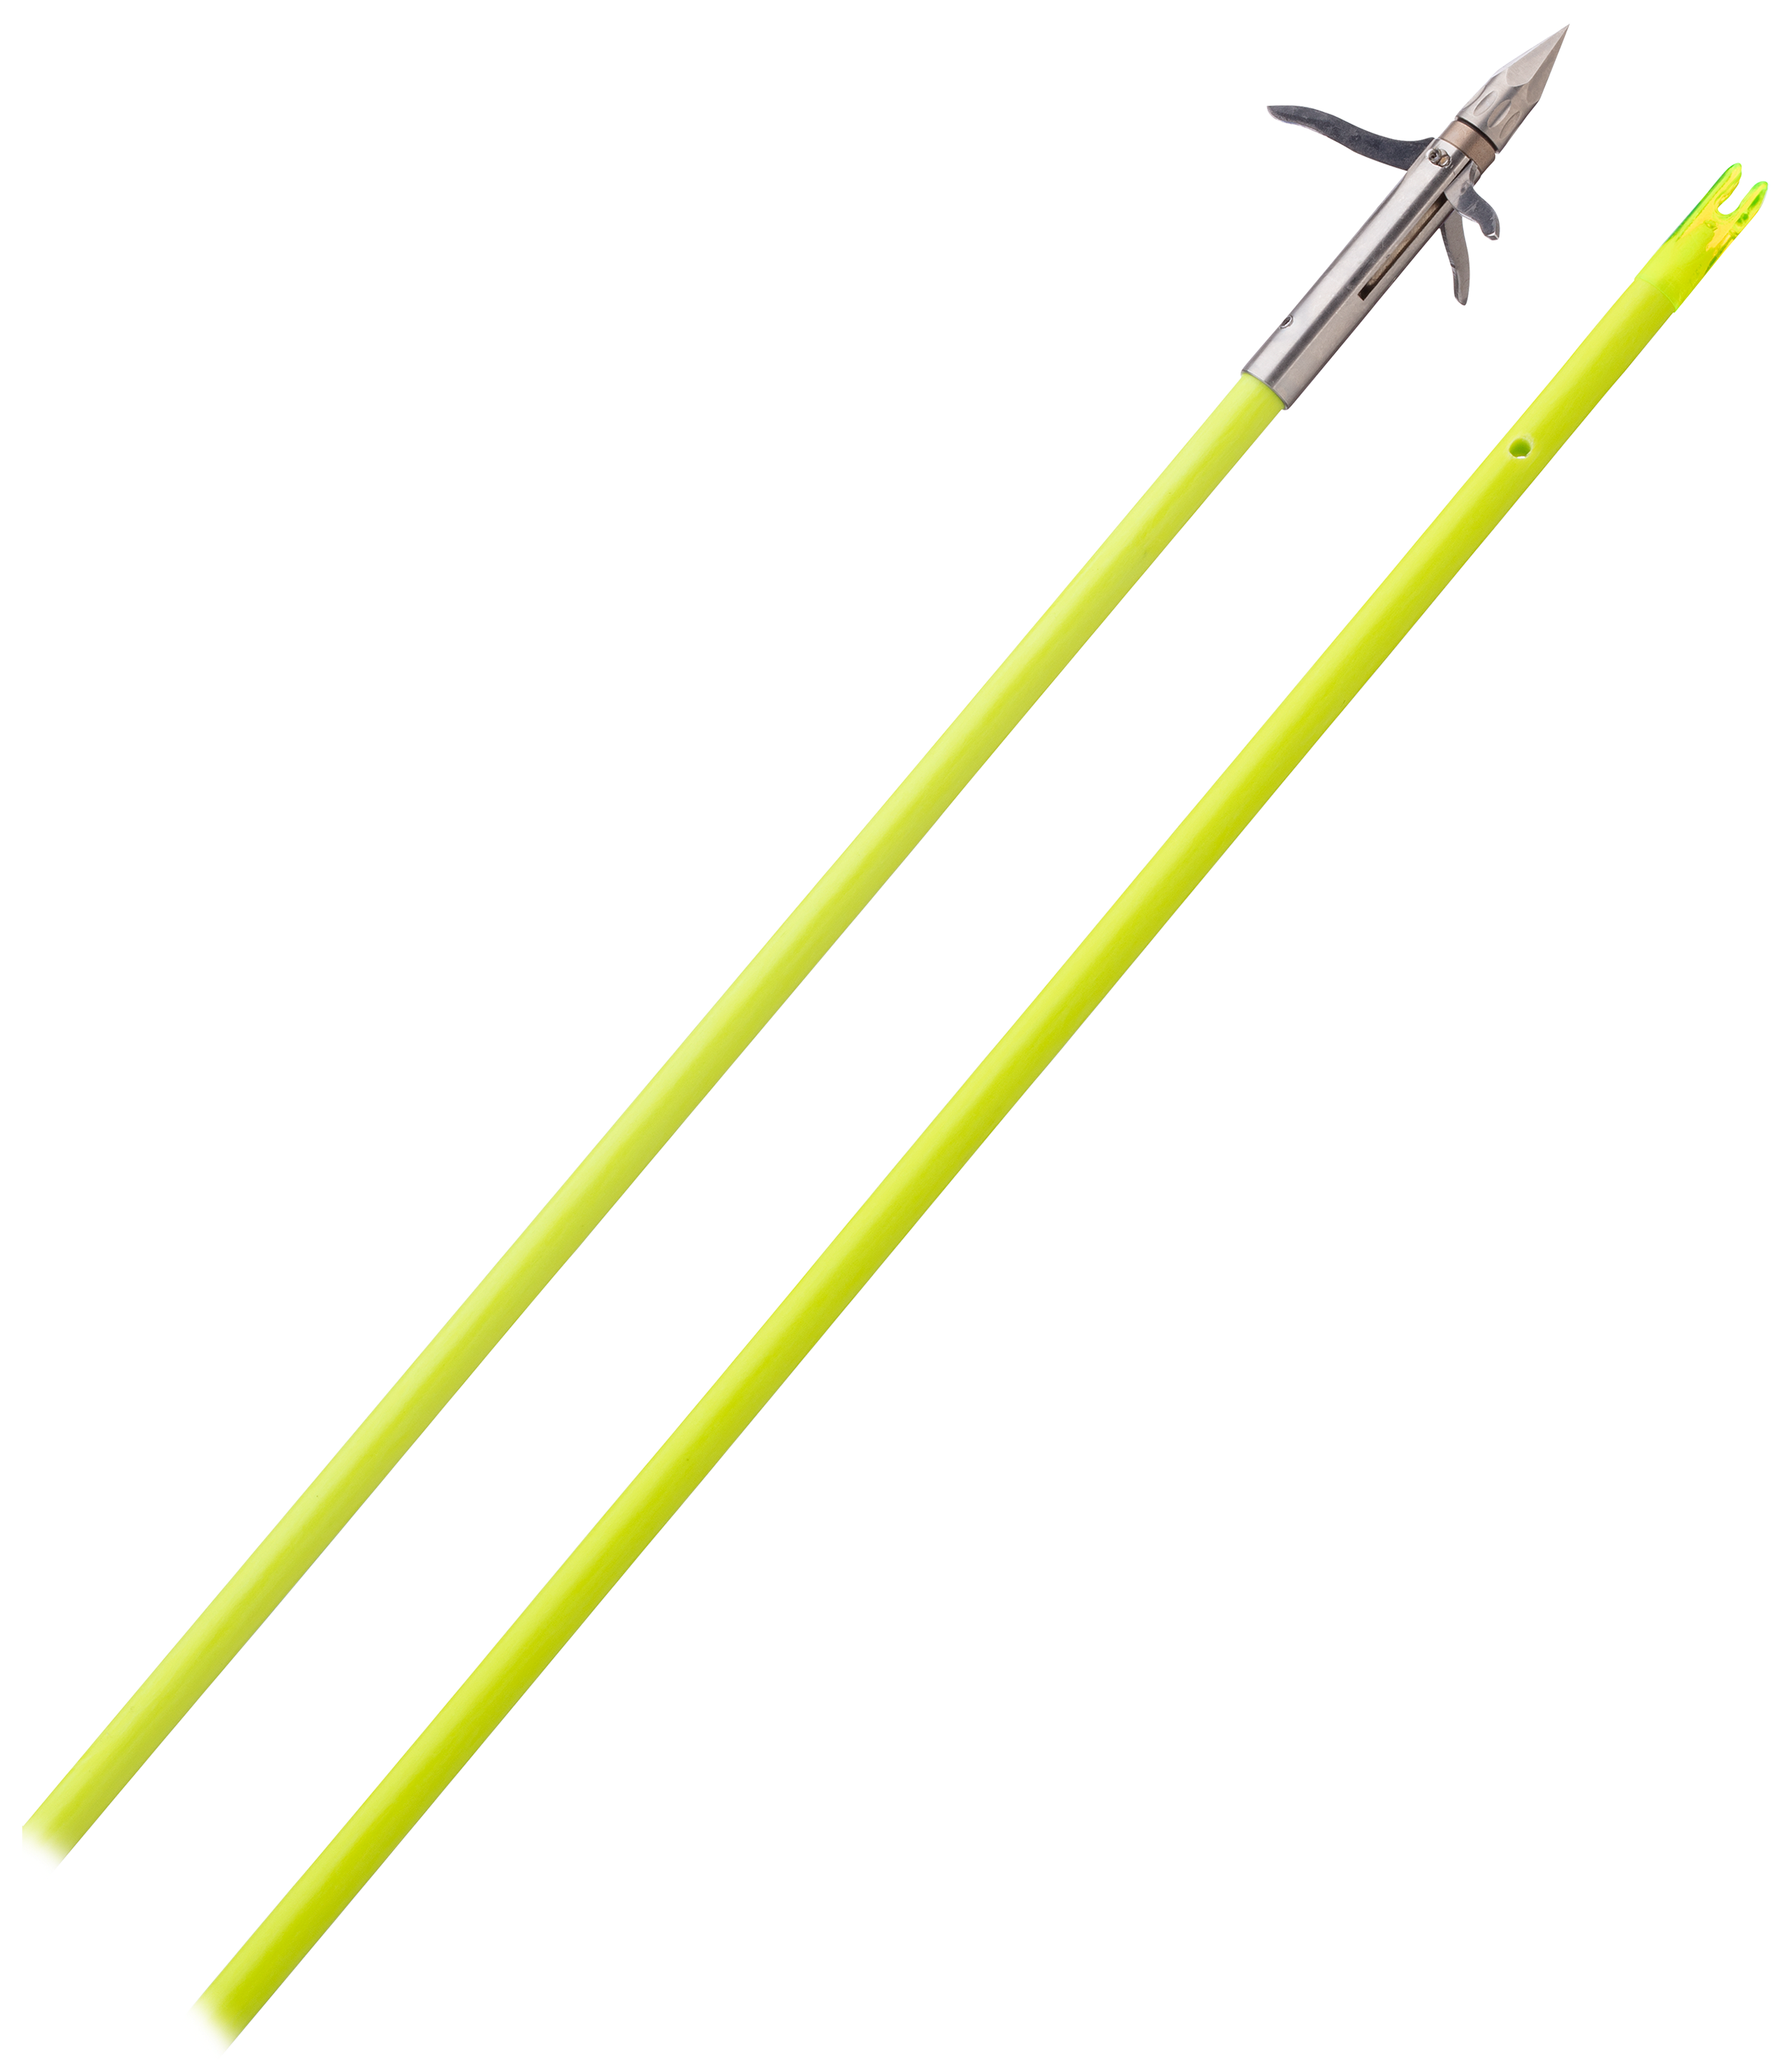  Muzzy Fiberglass Bowfishing Arrow with Iron 2 or 3-blade  Point, Nock and Bottle Slide Installed, Chartreuse : Sports & Outdoors